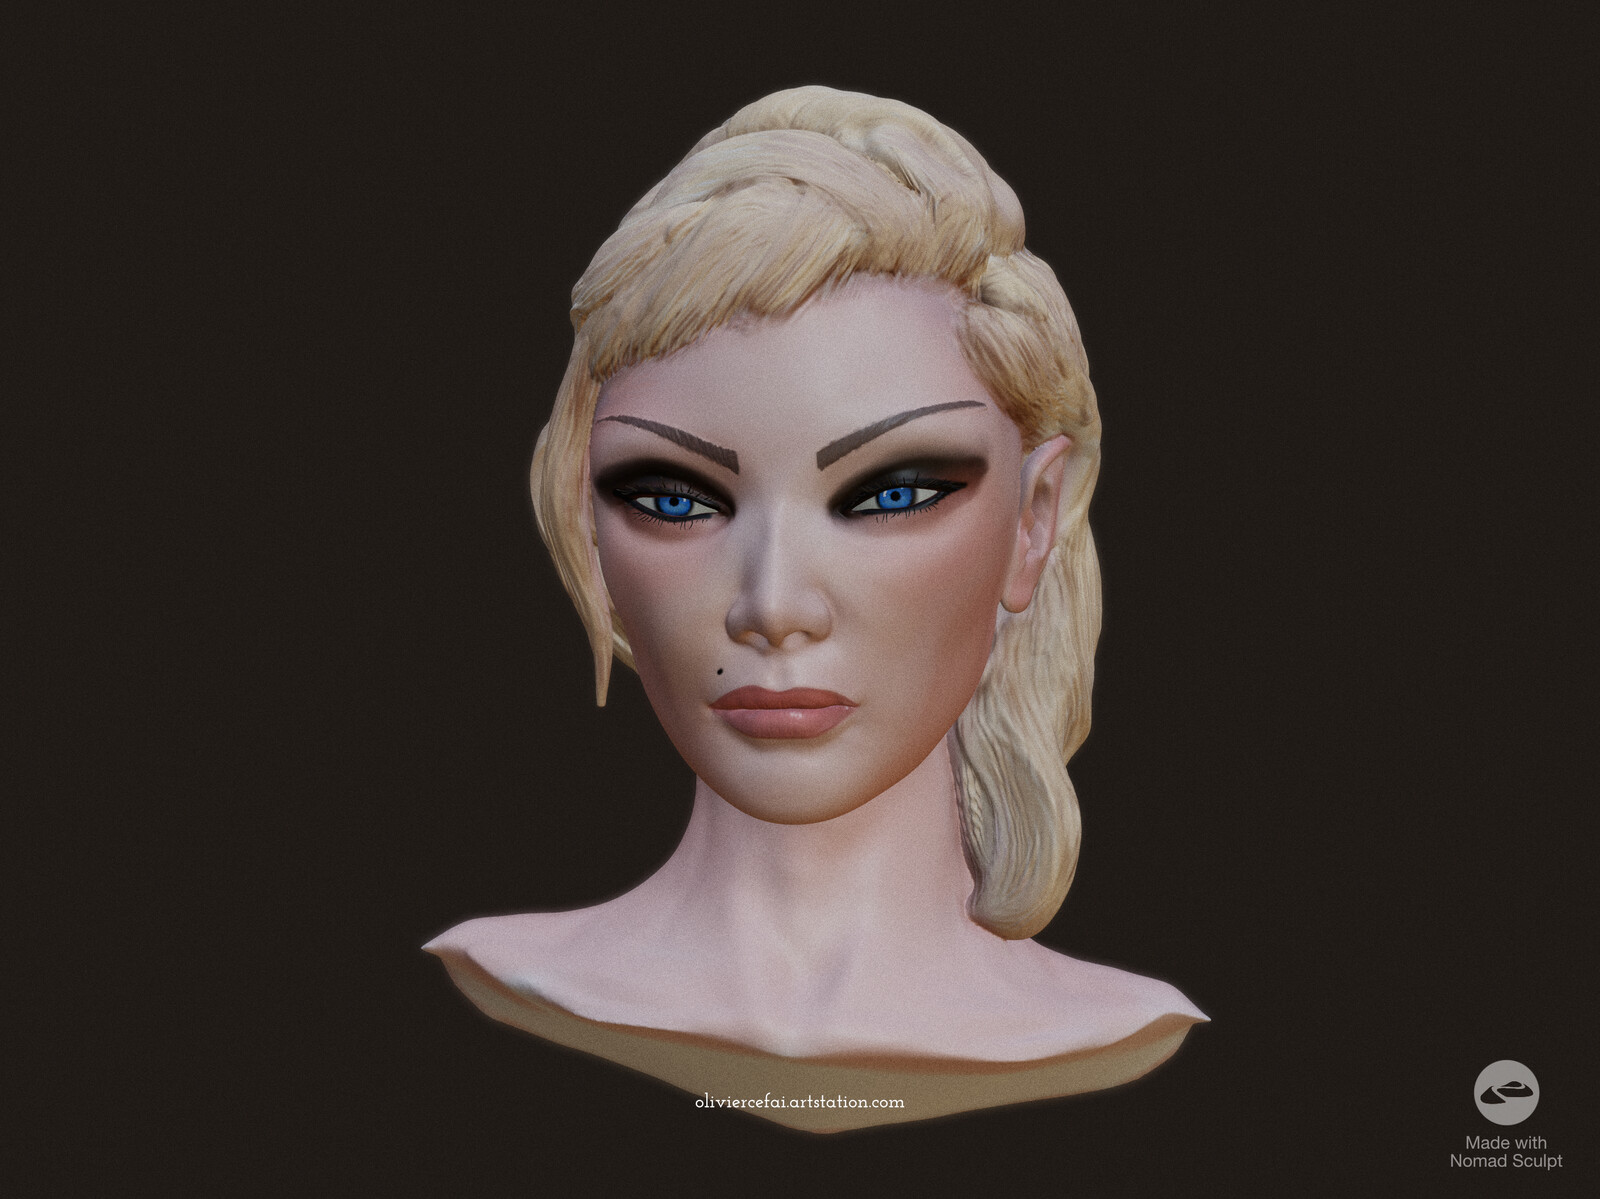 Sculpt + painting + rendering entirely done in Nomad Sculpt, starting from a sphrere